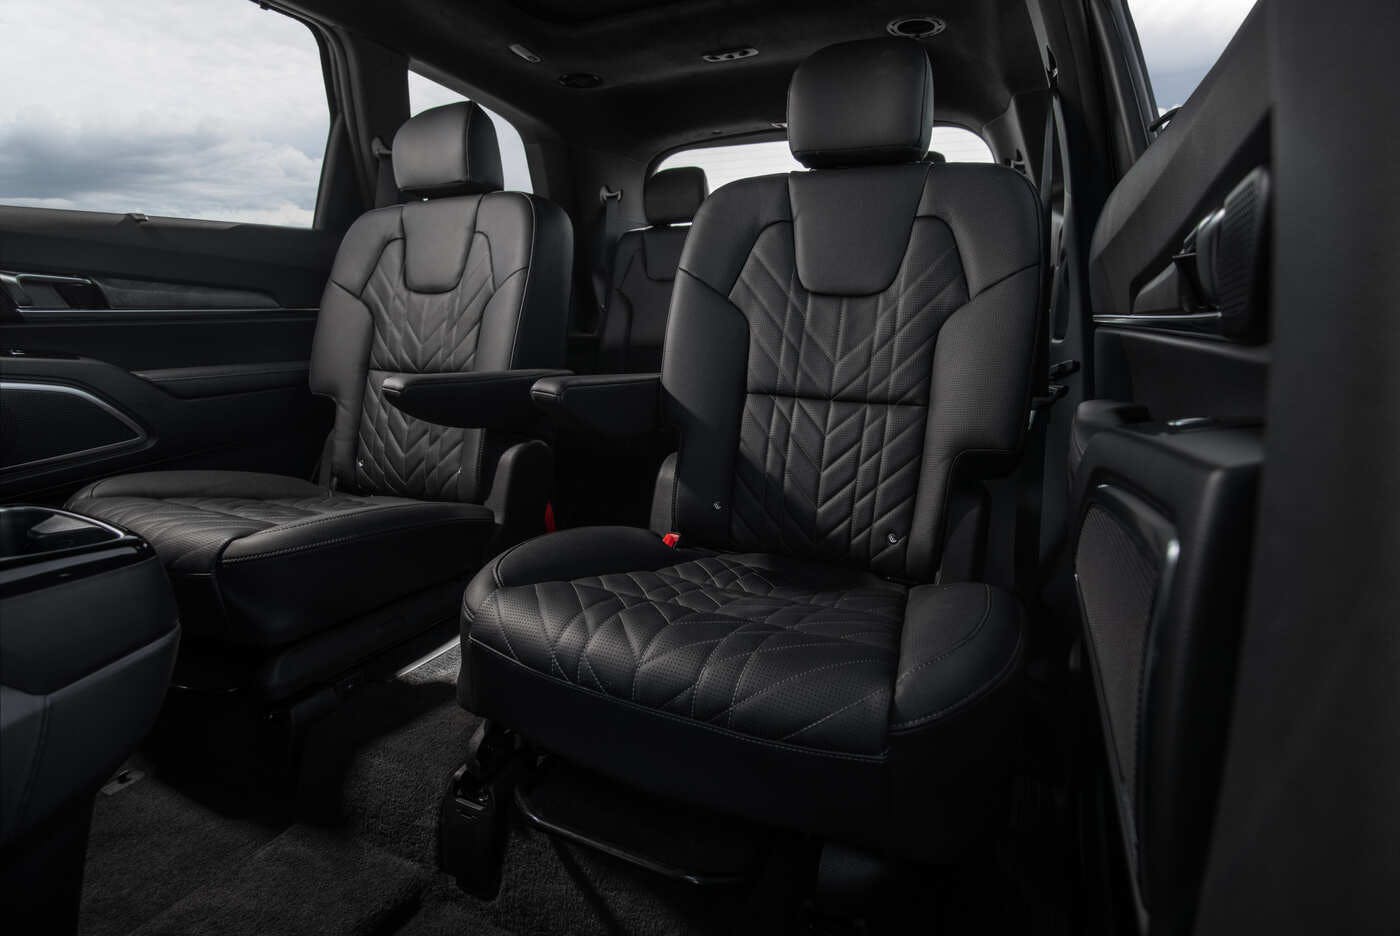 The Best Interior Features In The 2020 Kia Telluride 3Row SUV vlr.eng.br